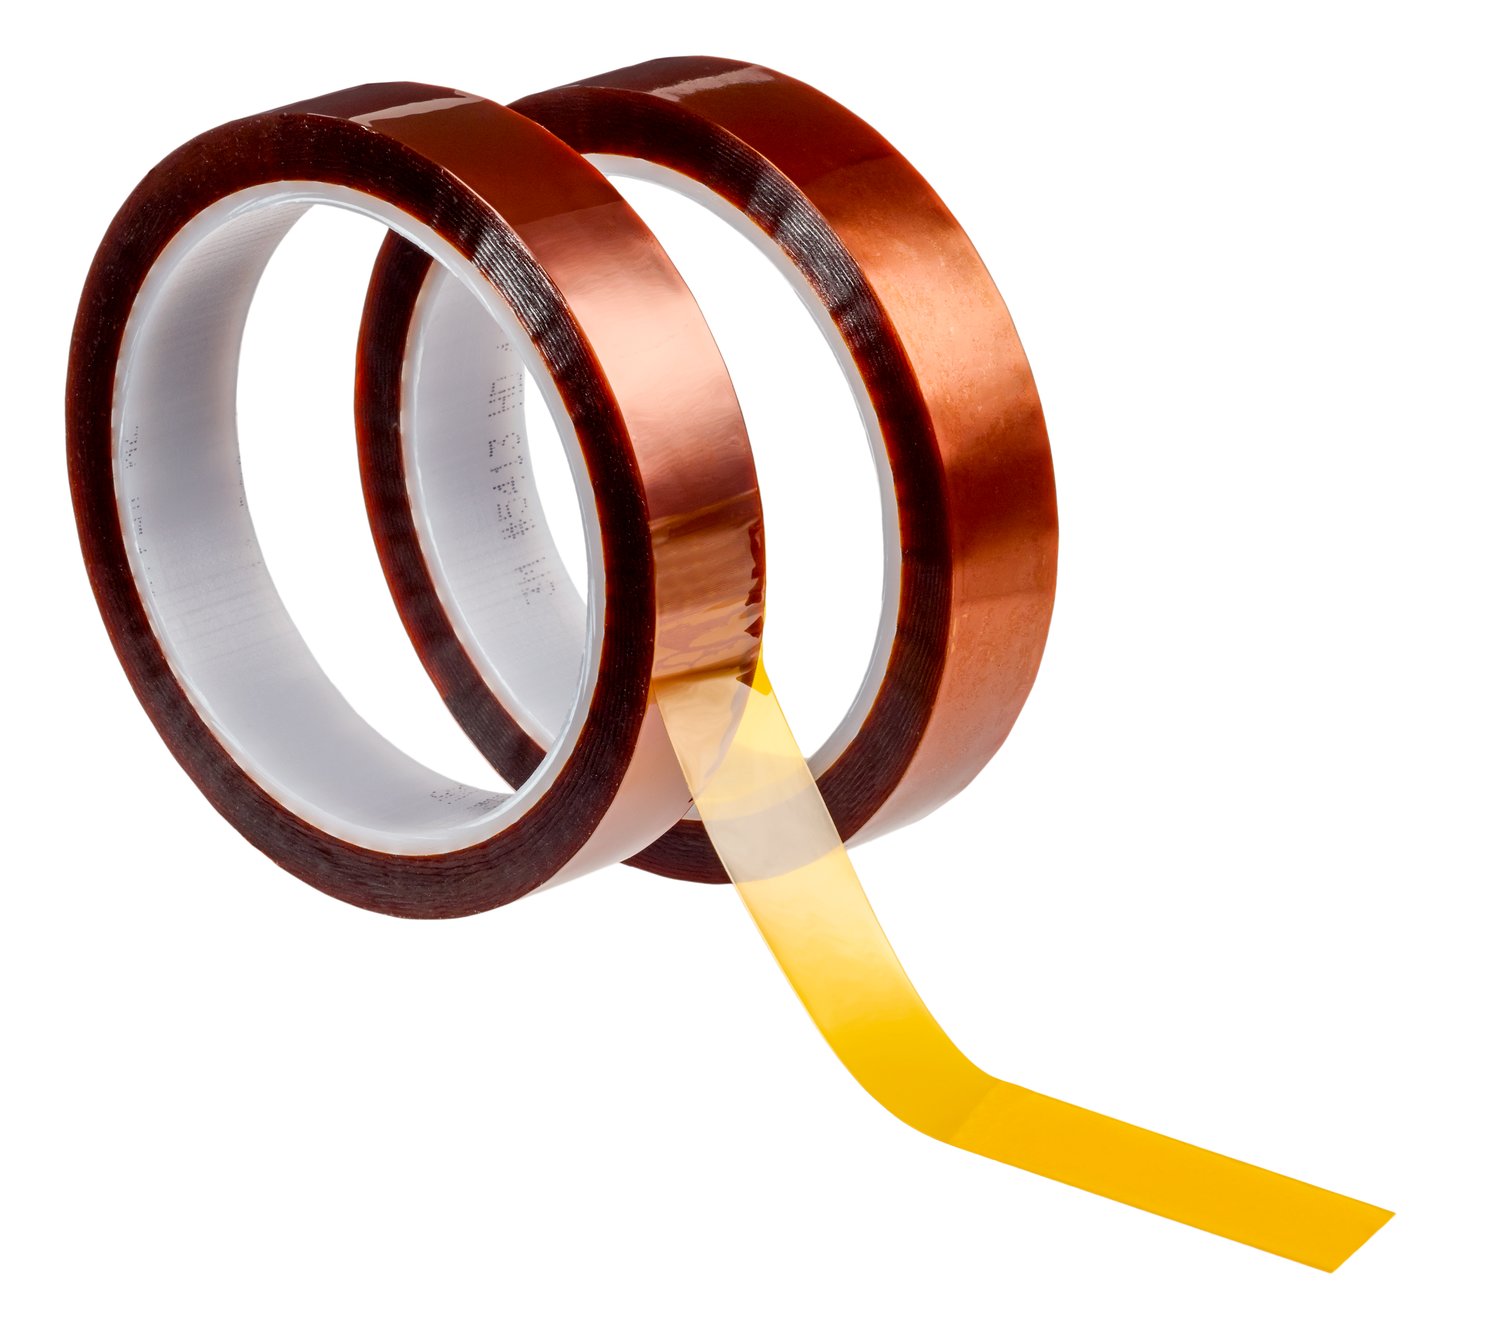 7100010443 - 3M Polyimide Film Tape 5413 Amber, 1/2 in x 36 yds x 2.7 mil, 18/Case, Blister